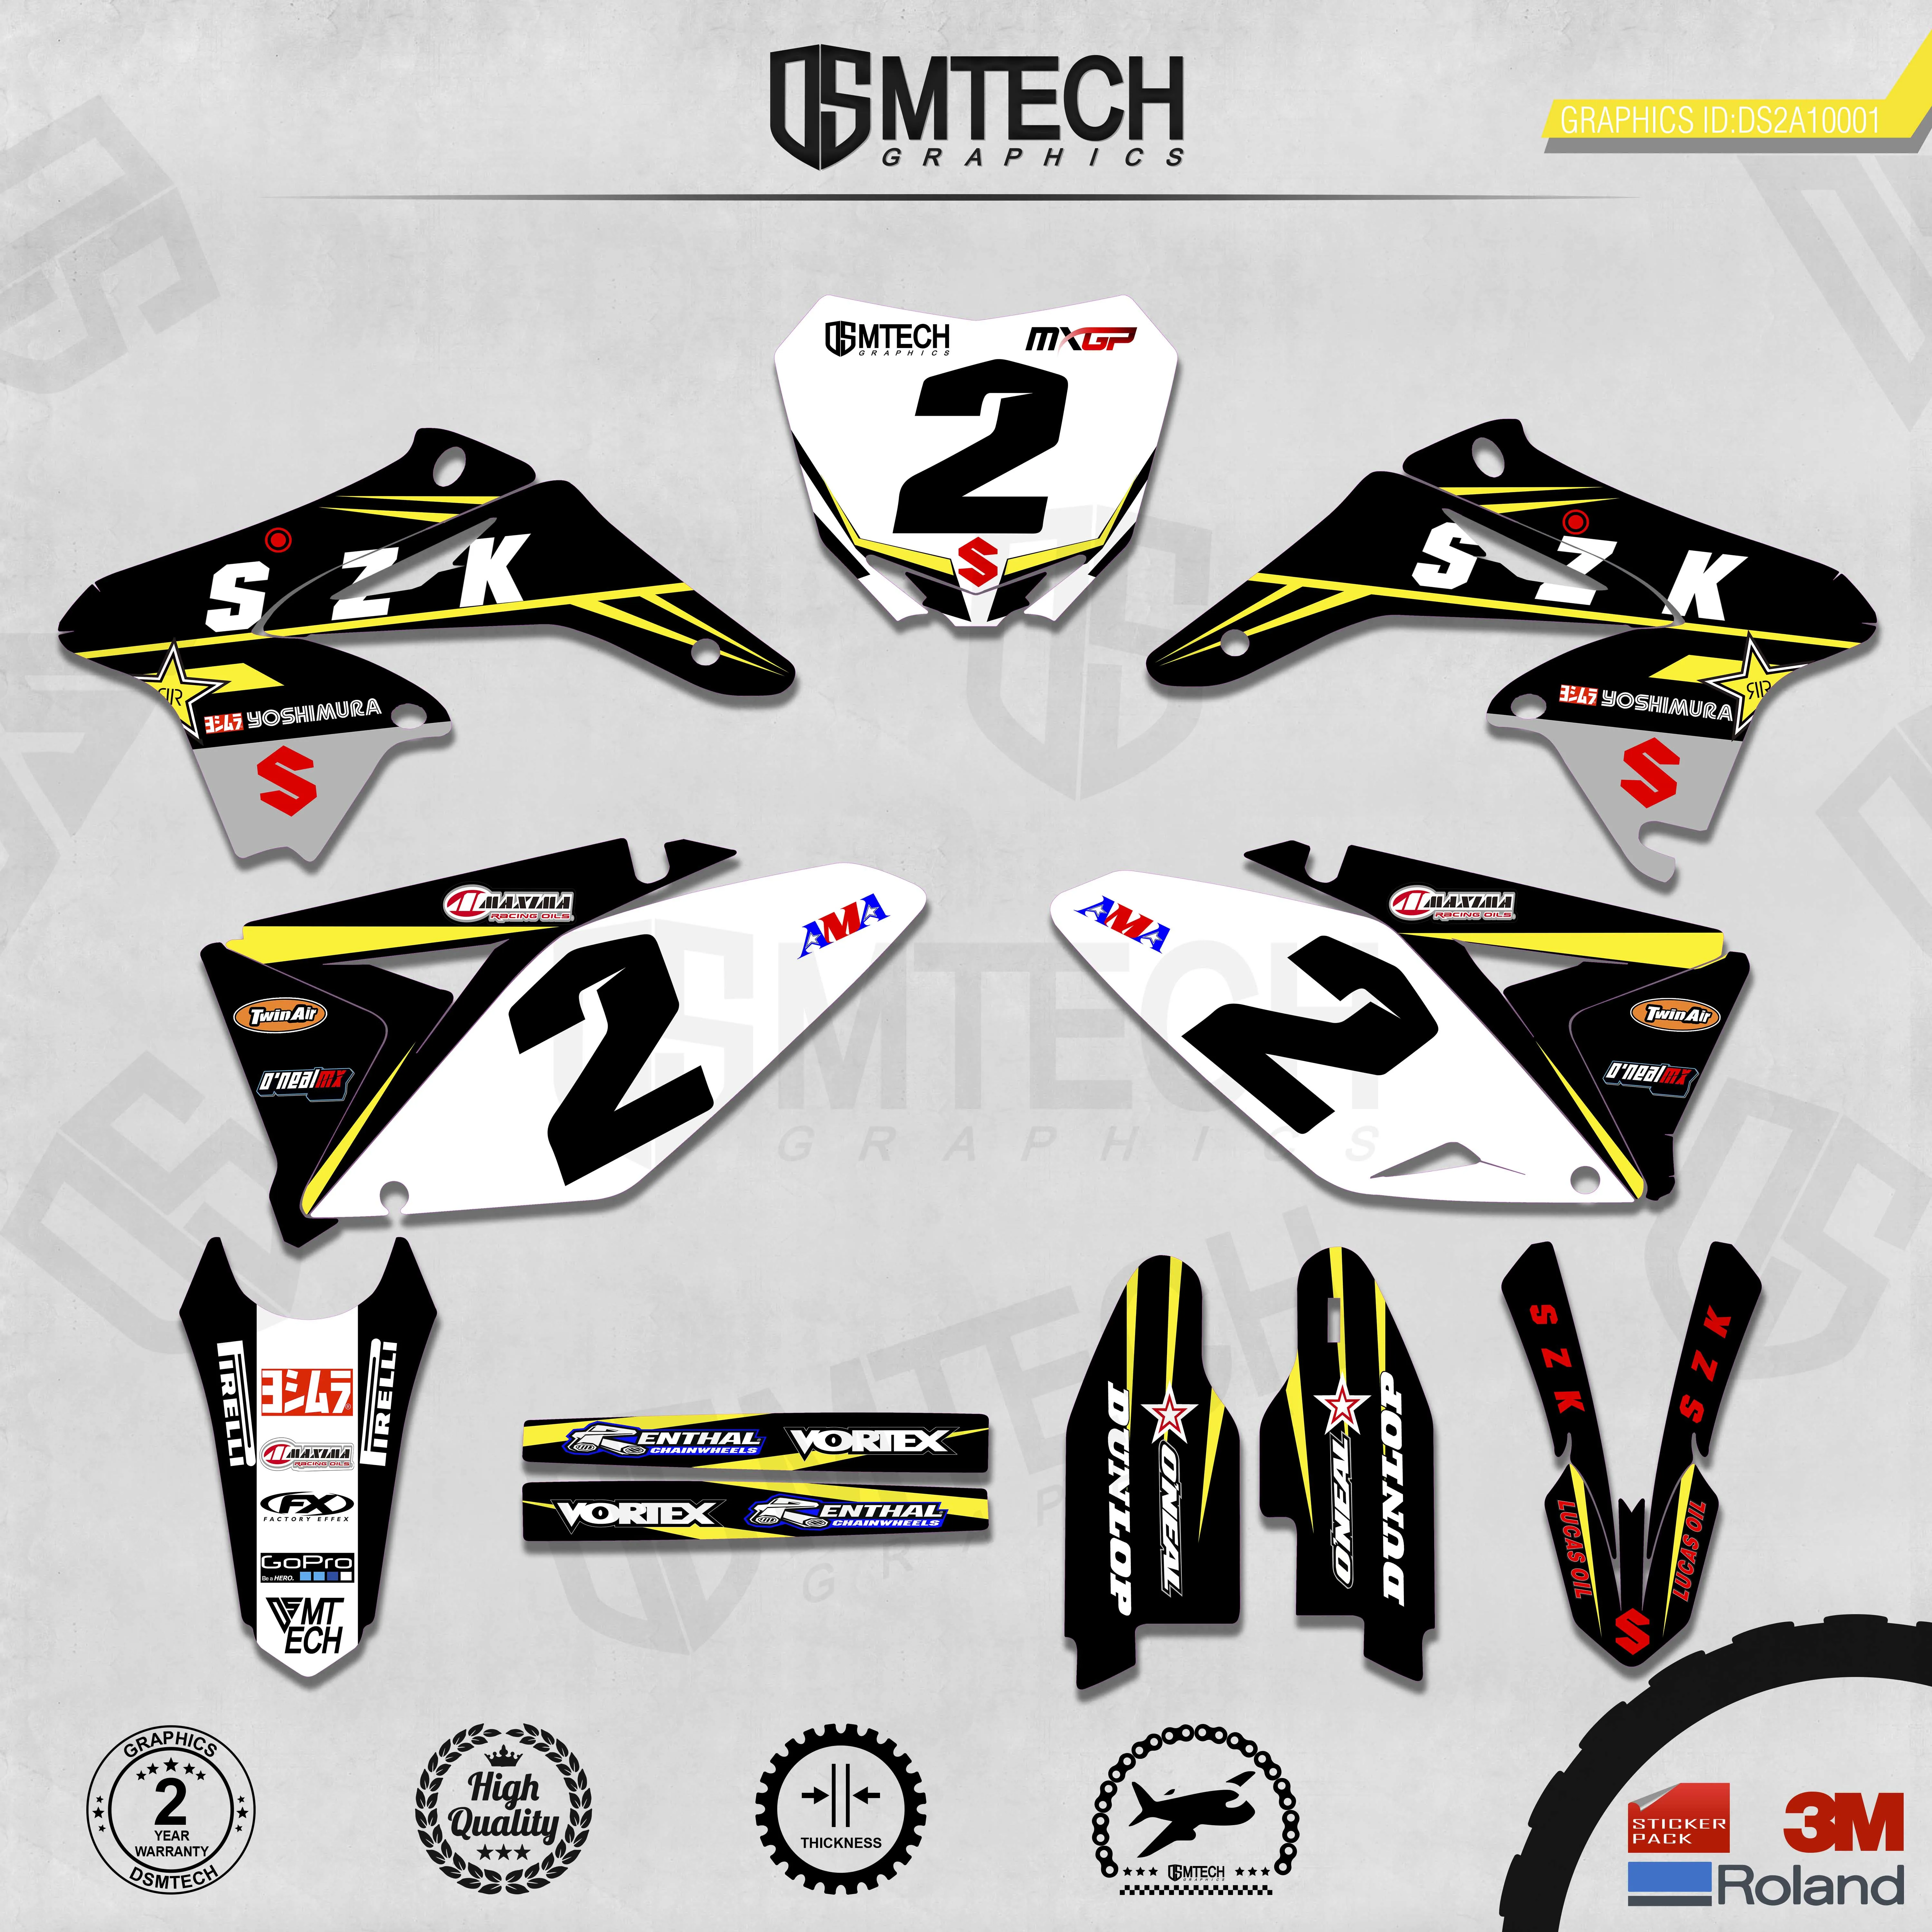 DSMTECH Customized Team Graphics Backgrounds Decals 3M Custom Stickers For 2010-2018 RMZ250  001